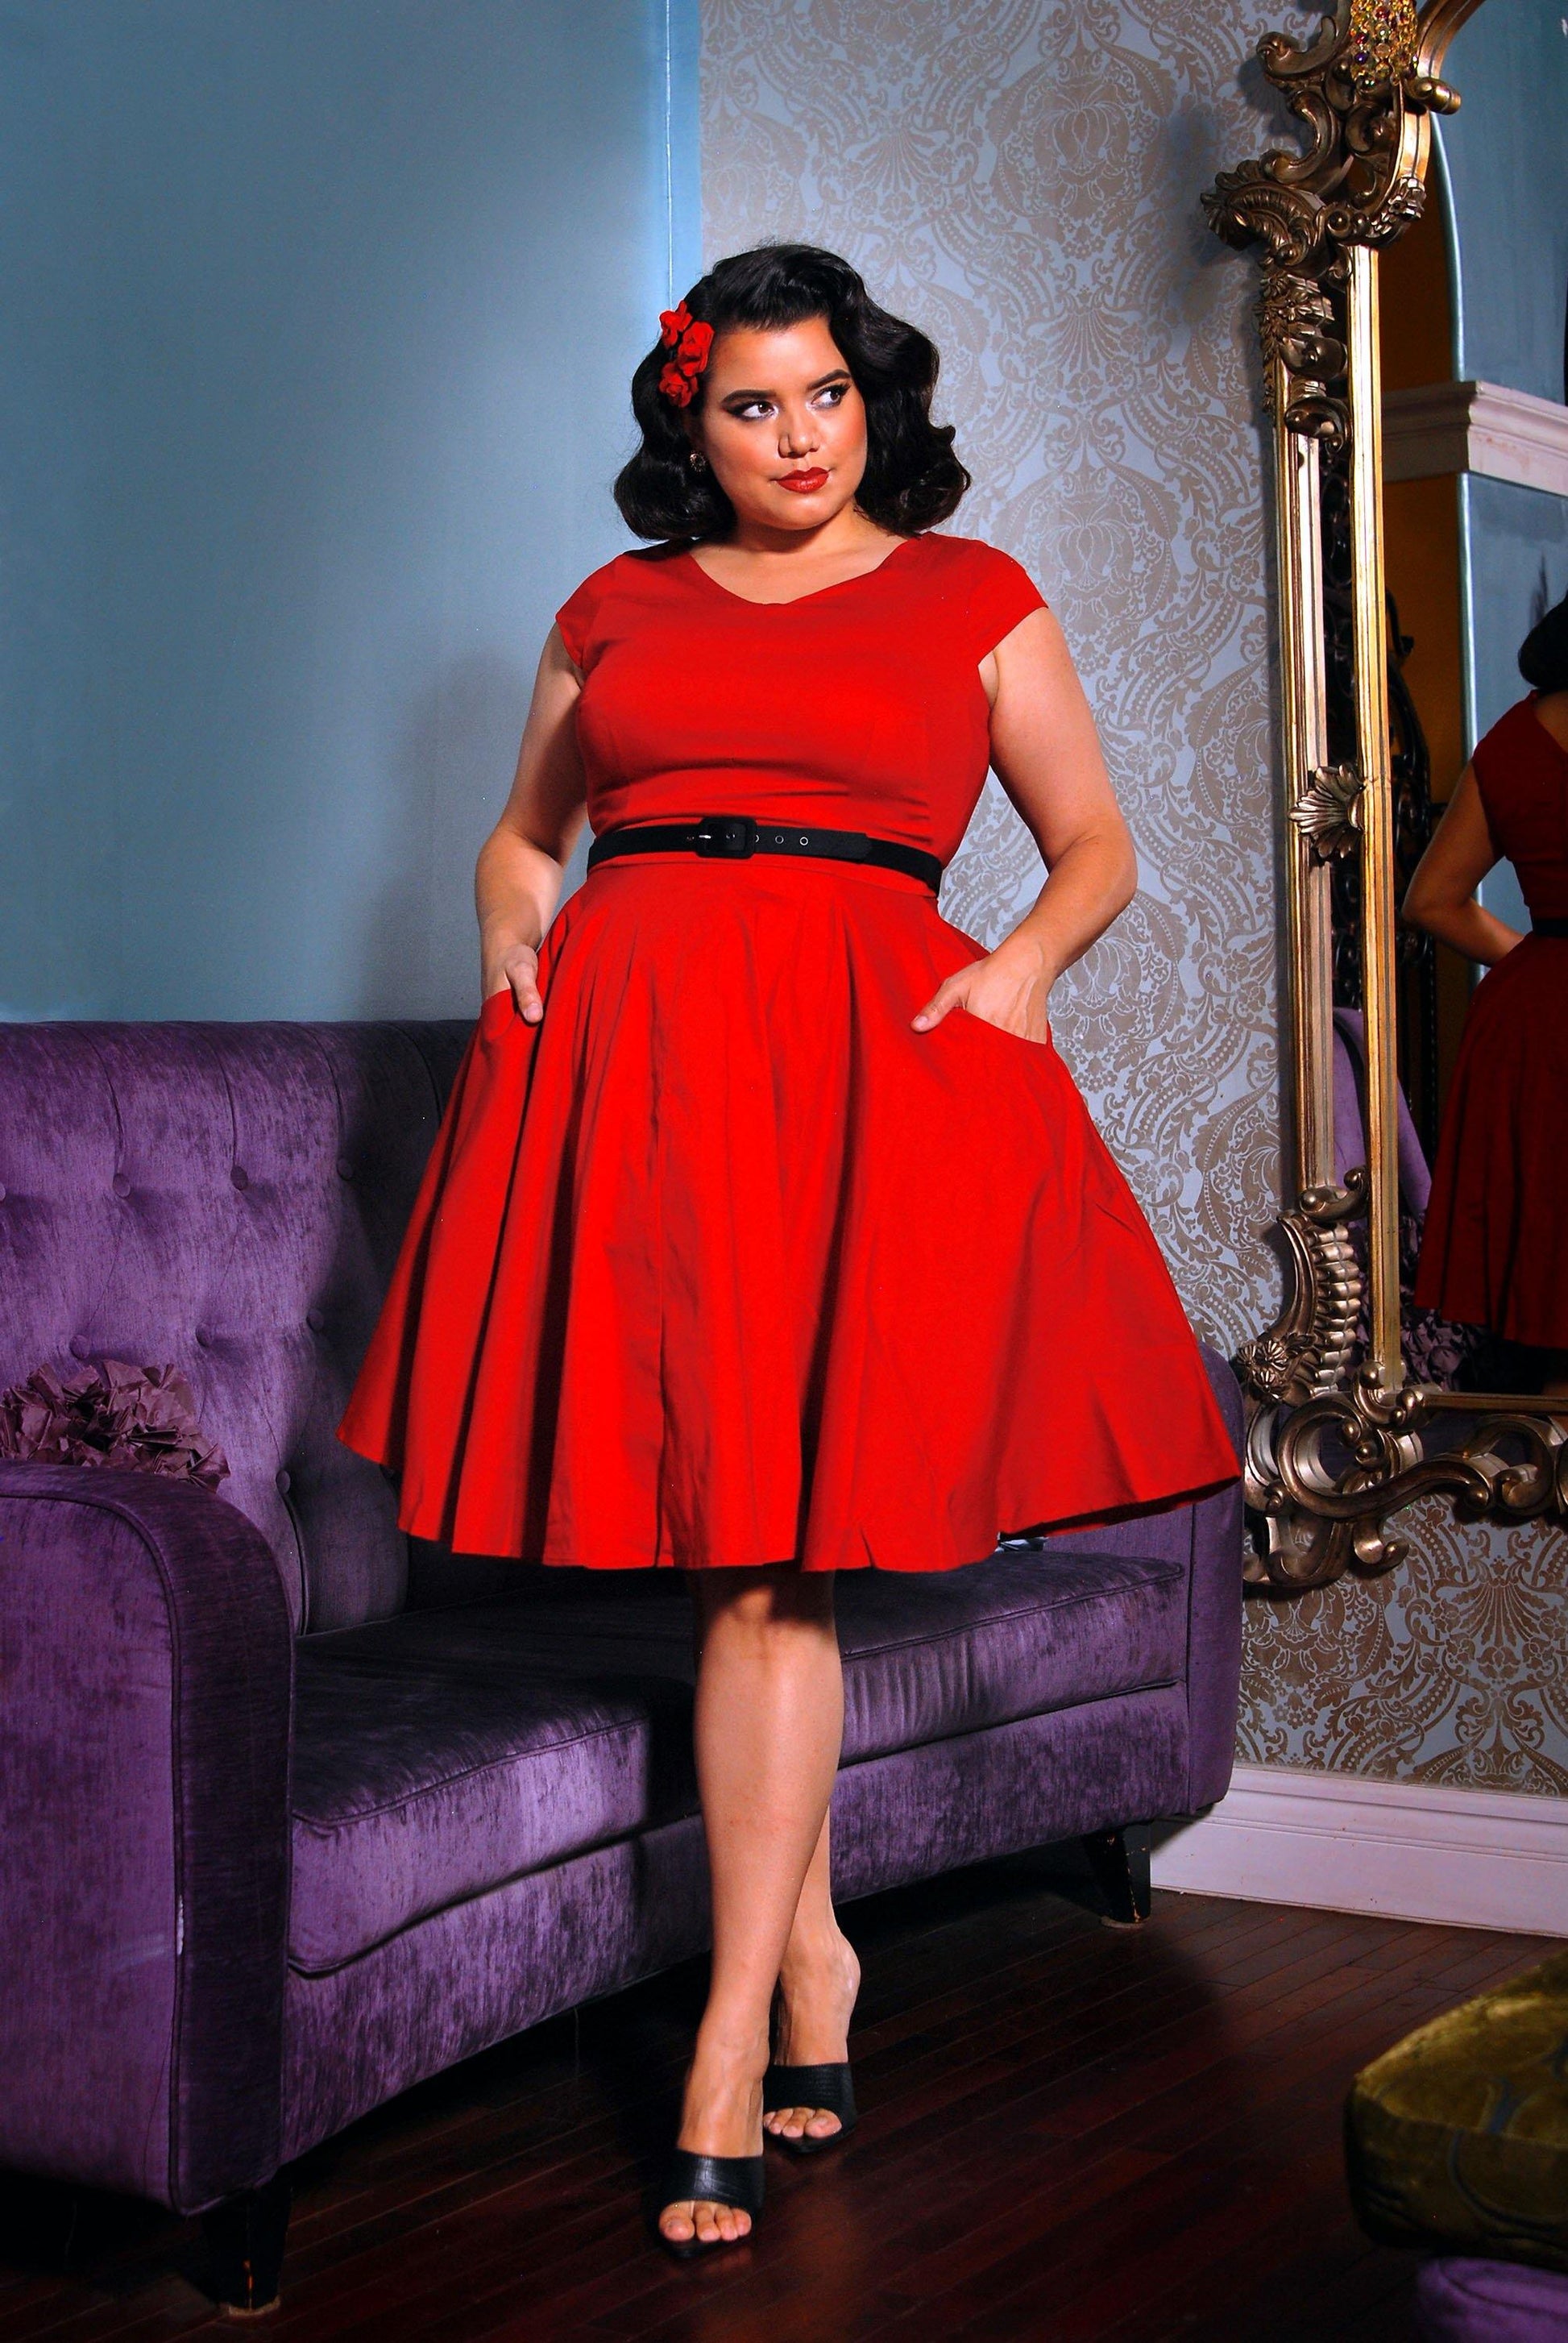 OYS - Sale - Celia Vintage Swing Dress in Solid Red Cotton Satee – pinupgirlclothing.com